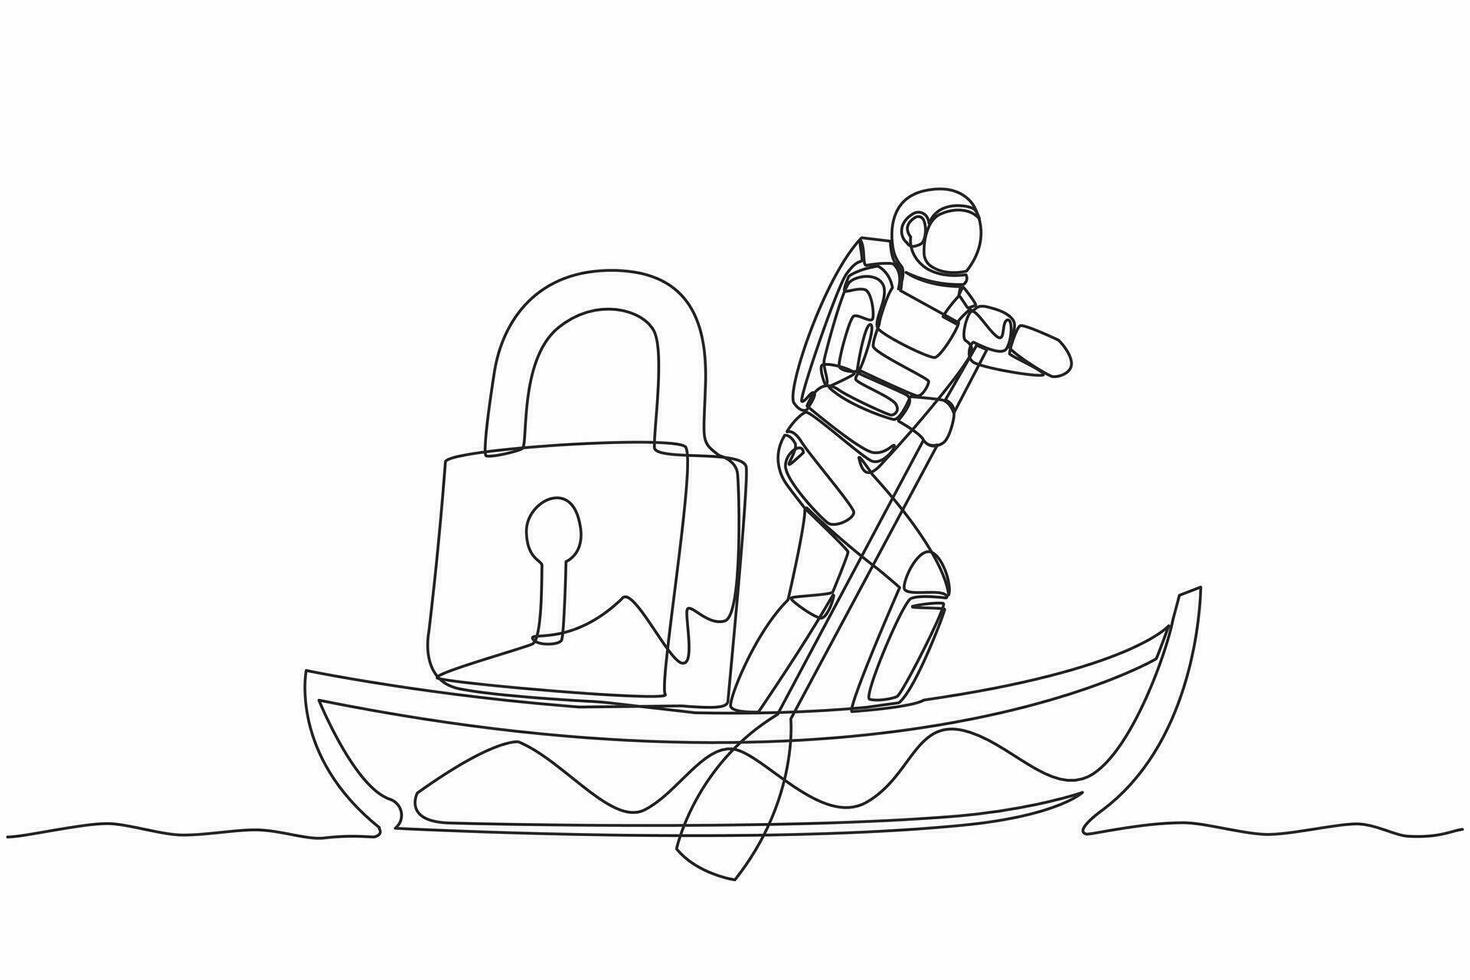 Single one line drawing astronaut sailing away on boat with padlock. Spaceship launch safety and protection. Cosmic galaxy space concept. Modern continuous line draw design graphic vector illustration